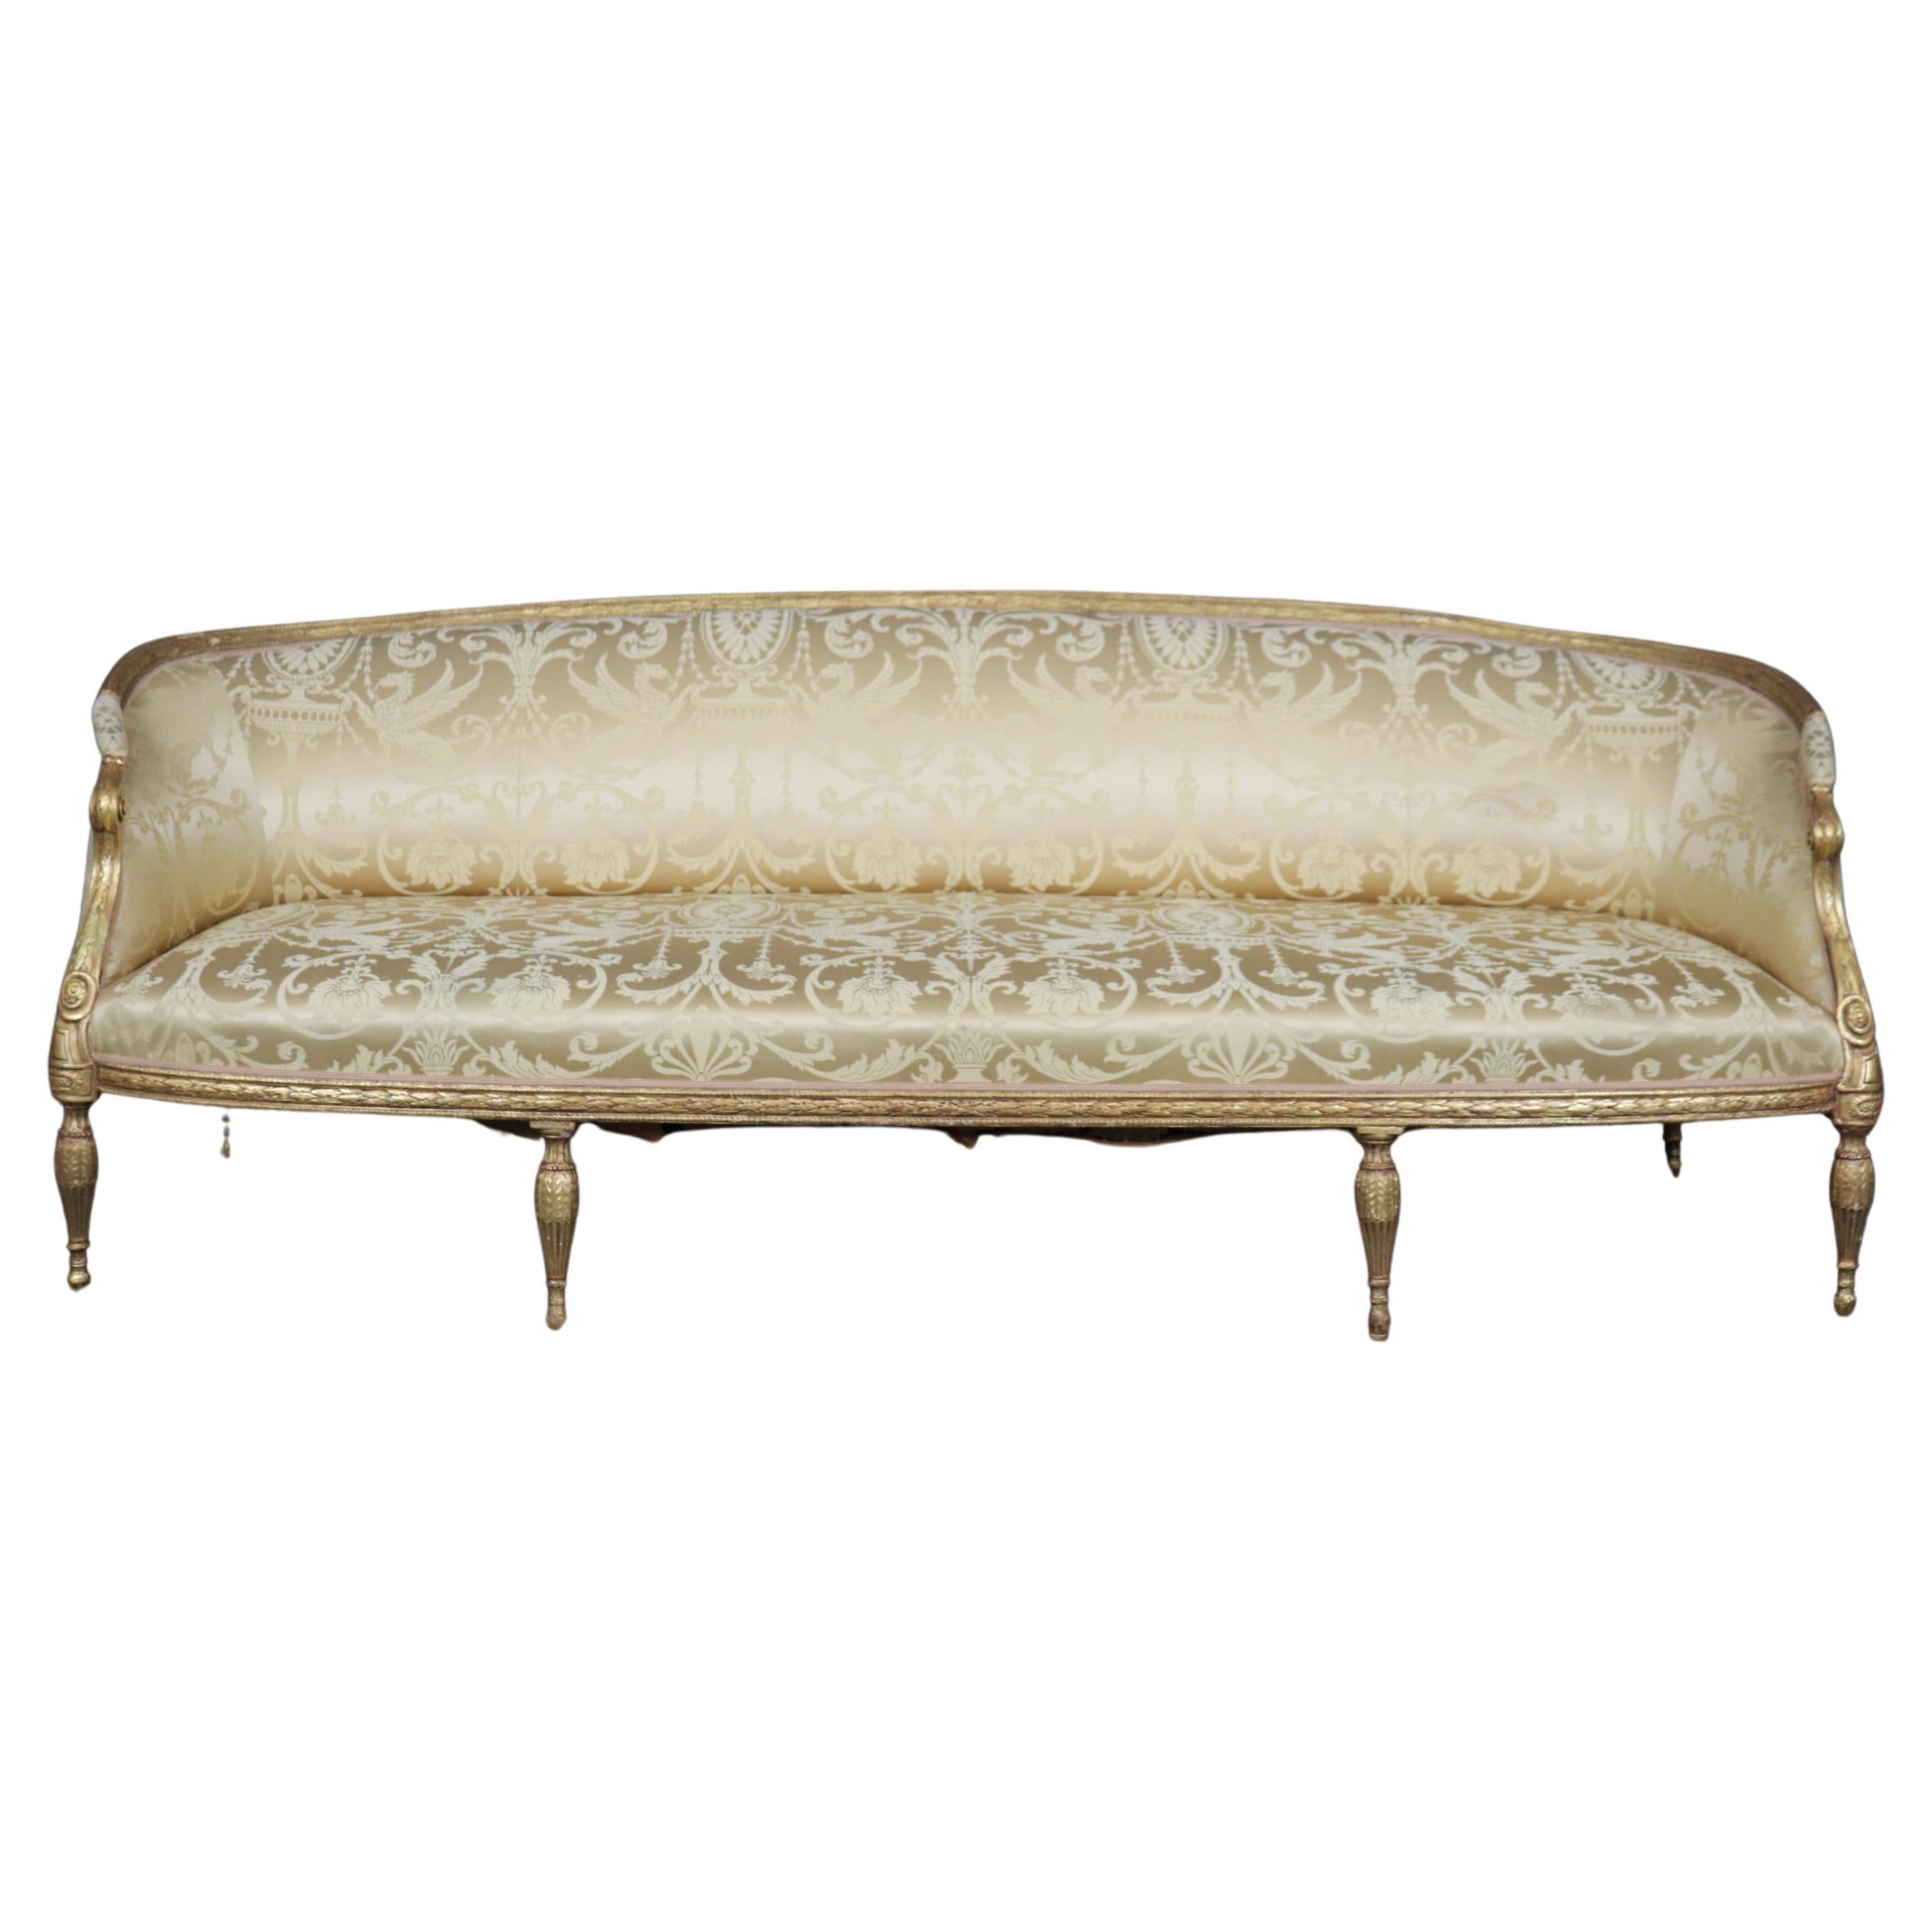 Monumental Gilded Meticulously Carved French Louis XVI Sofa Silk Upholstery For Sale